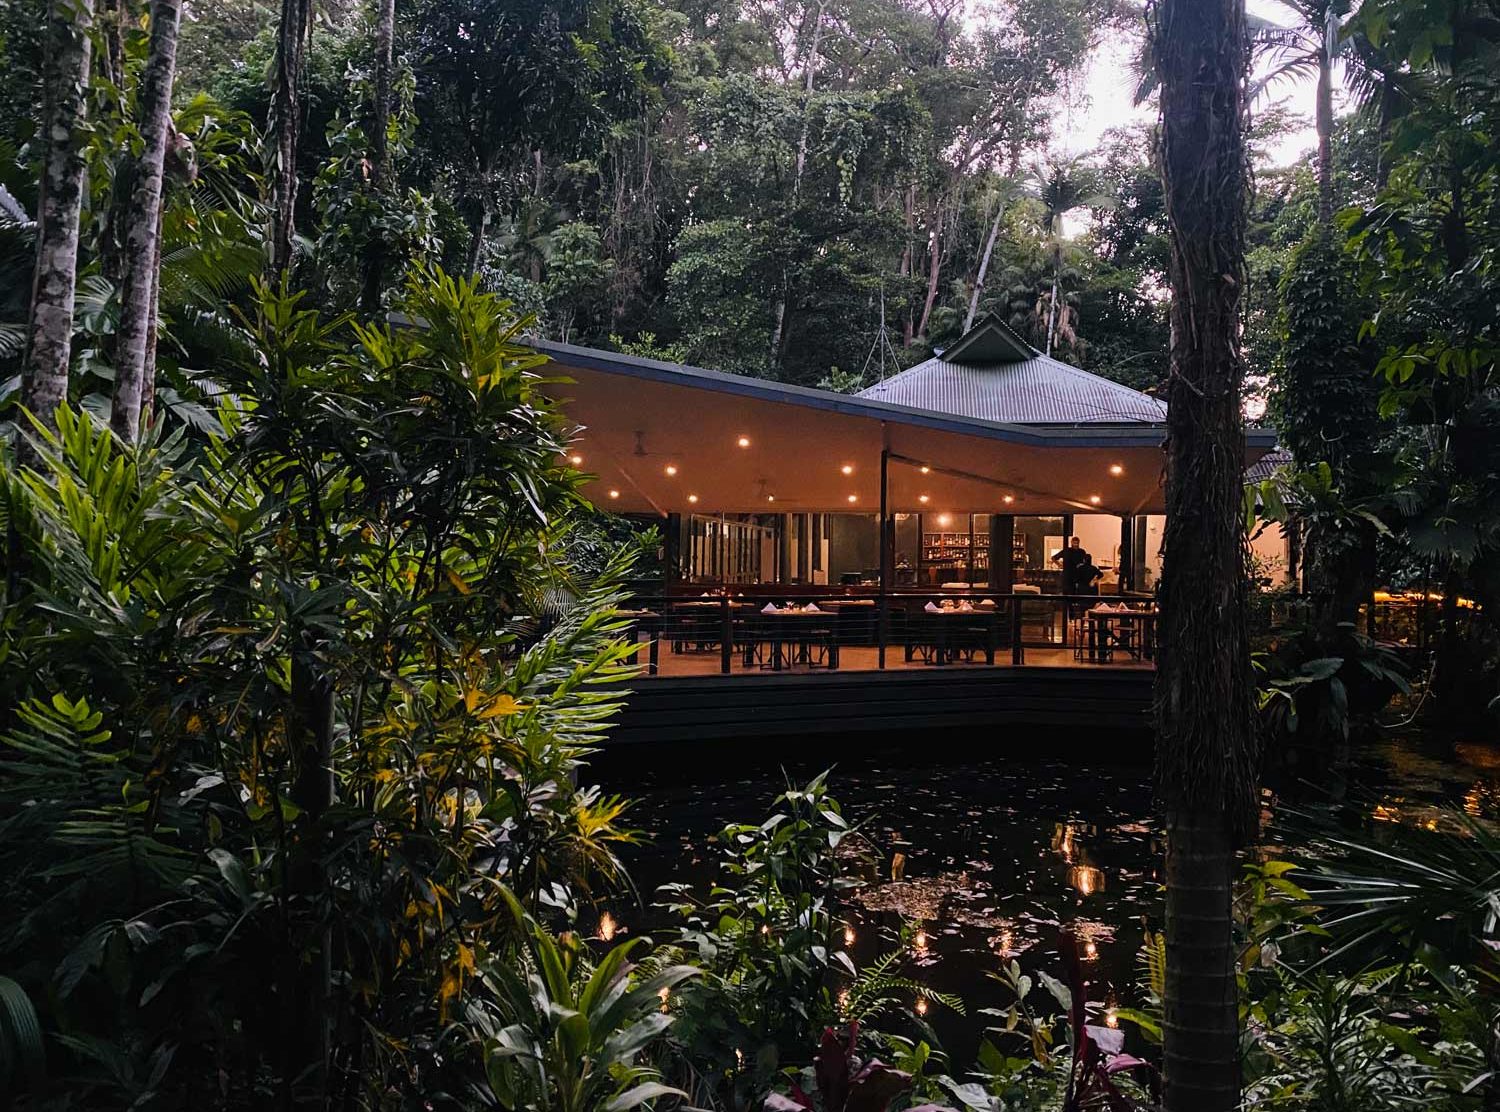 Daintree Ecolodge The Julaymba Restaurant. They minimise the use of single-use plastics and packaging throughout the property, kitchen, restaurant and rooms. The removal of single use in-room personal products to reduce excess plastic waste.